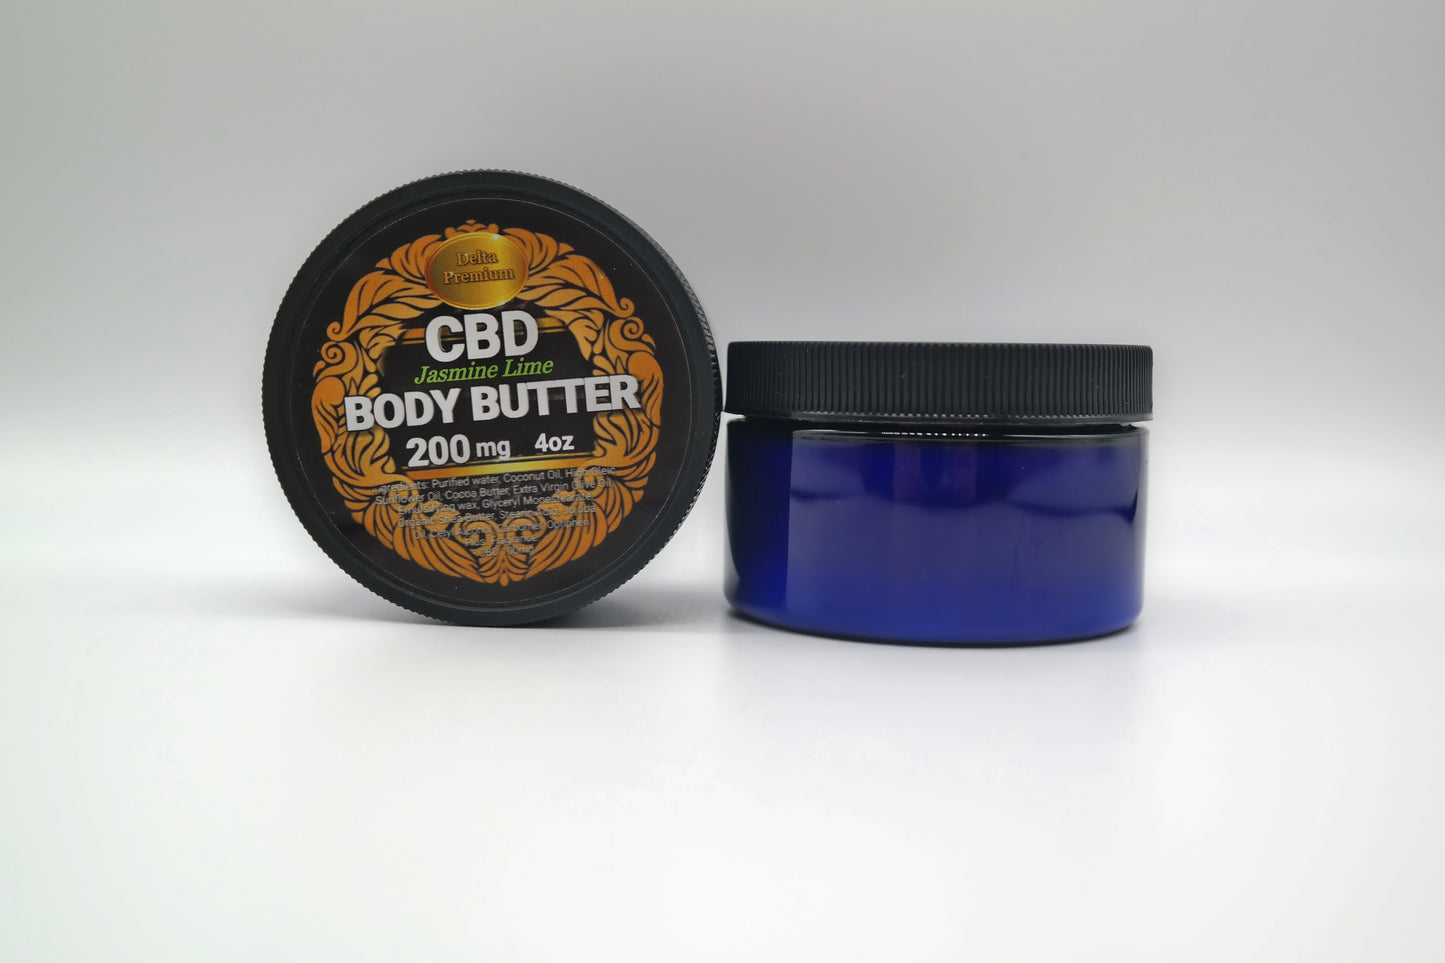 Easter bundle #1 Body butter and CBD gummies